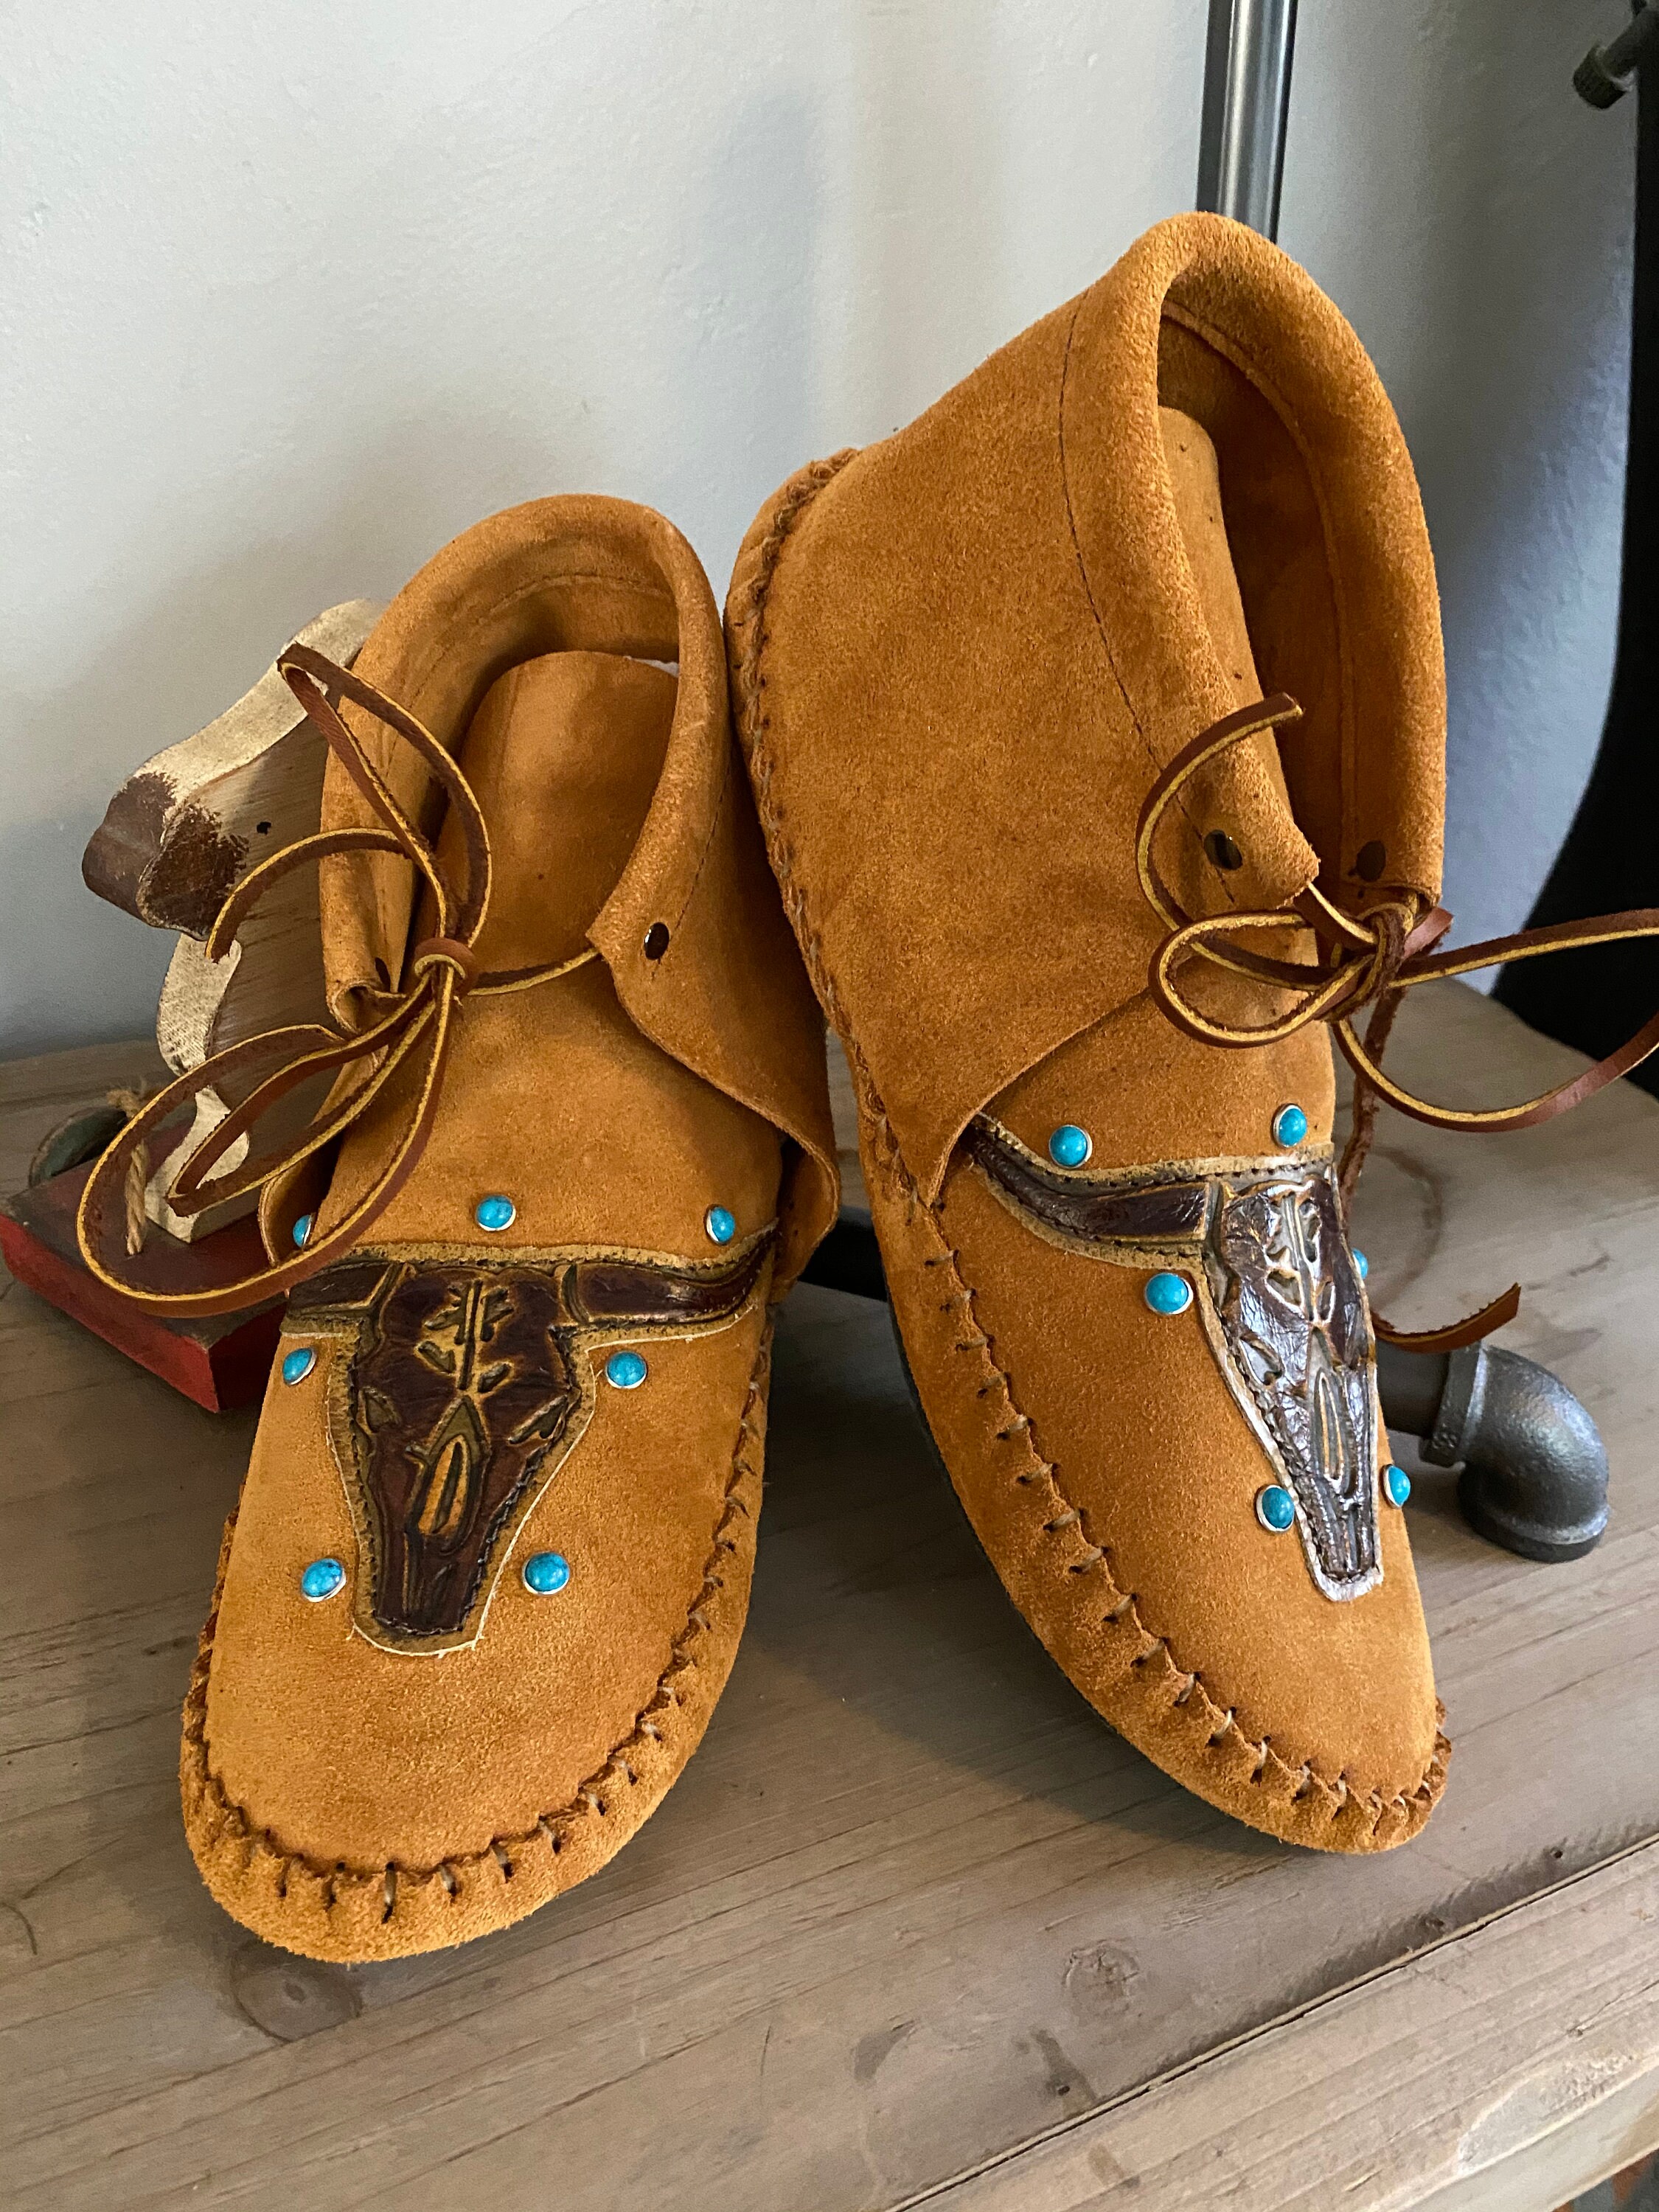 Moccasins Native American Leather Unique Handcrafted - Etsy